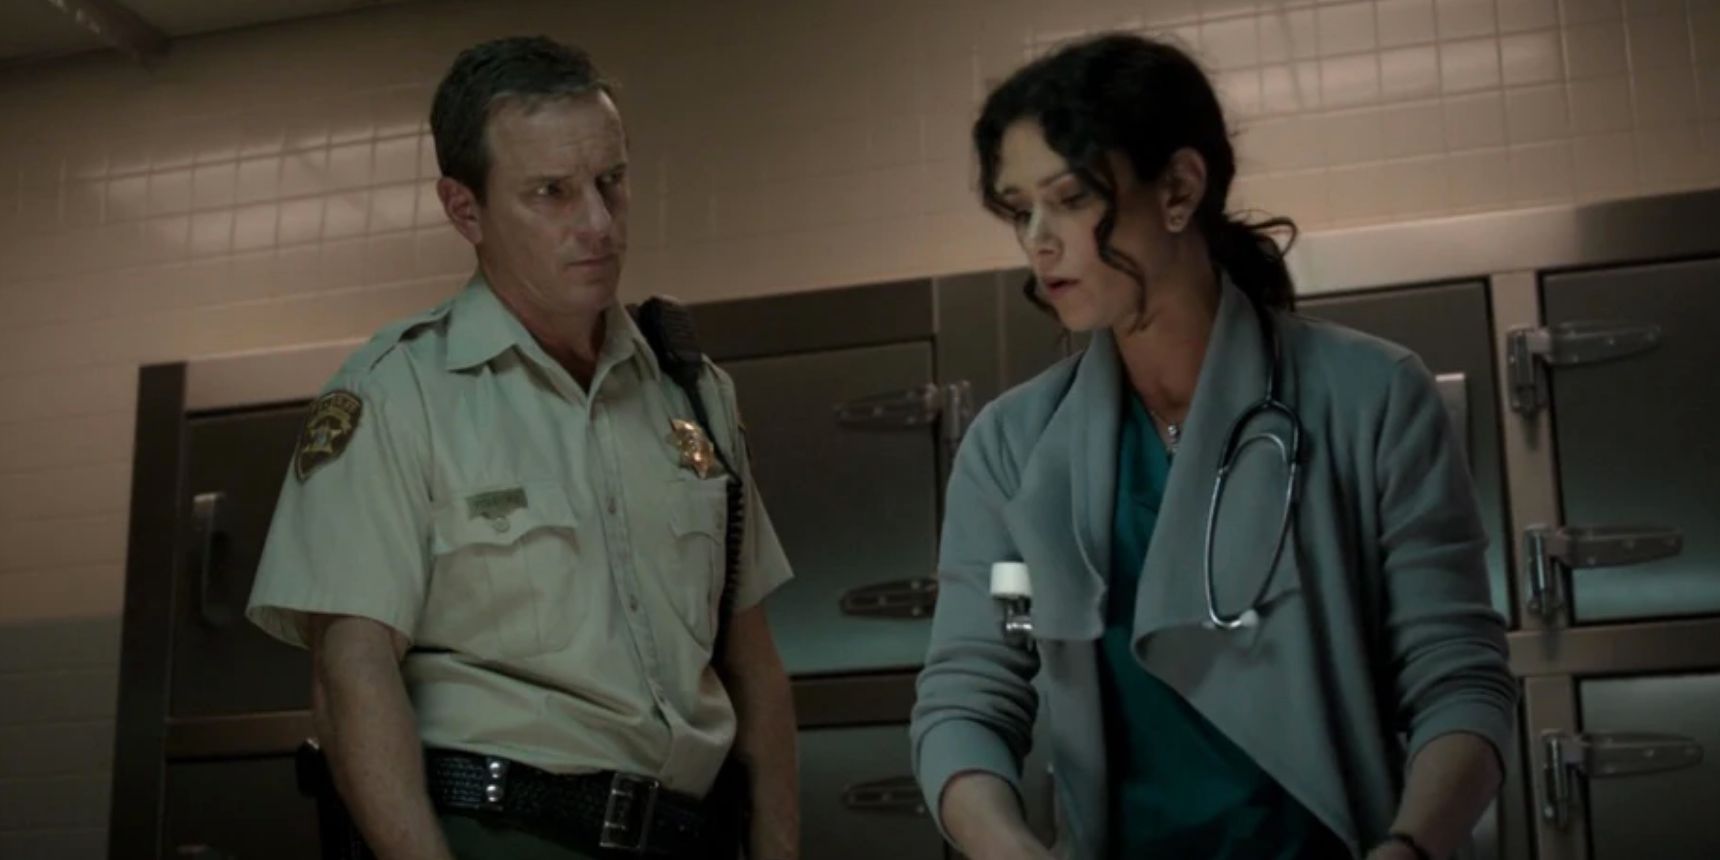 Stilinski and Melissa work together in the morgue in Teen Wolf